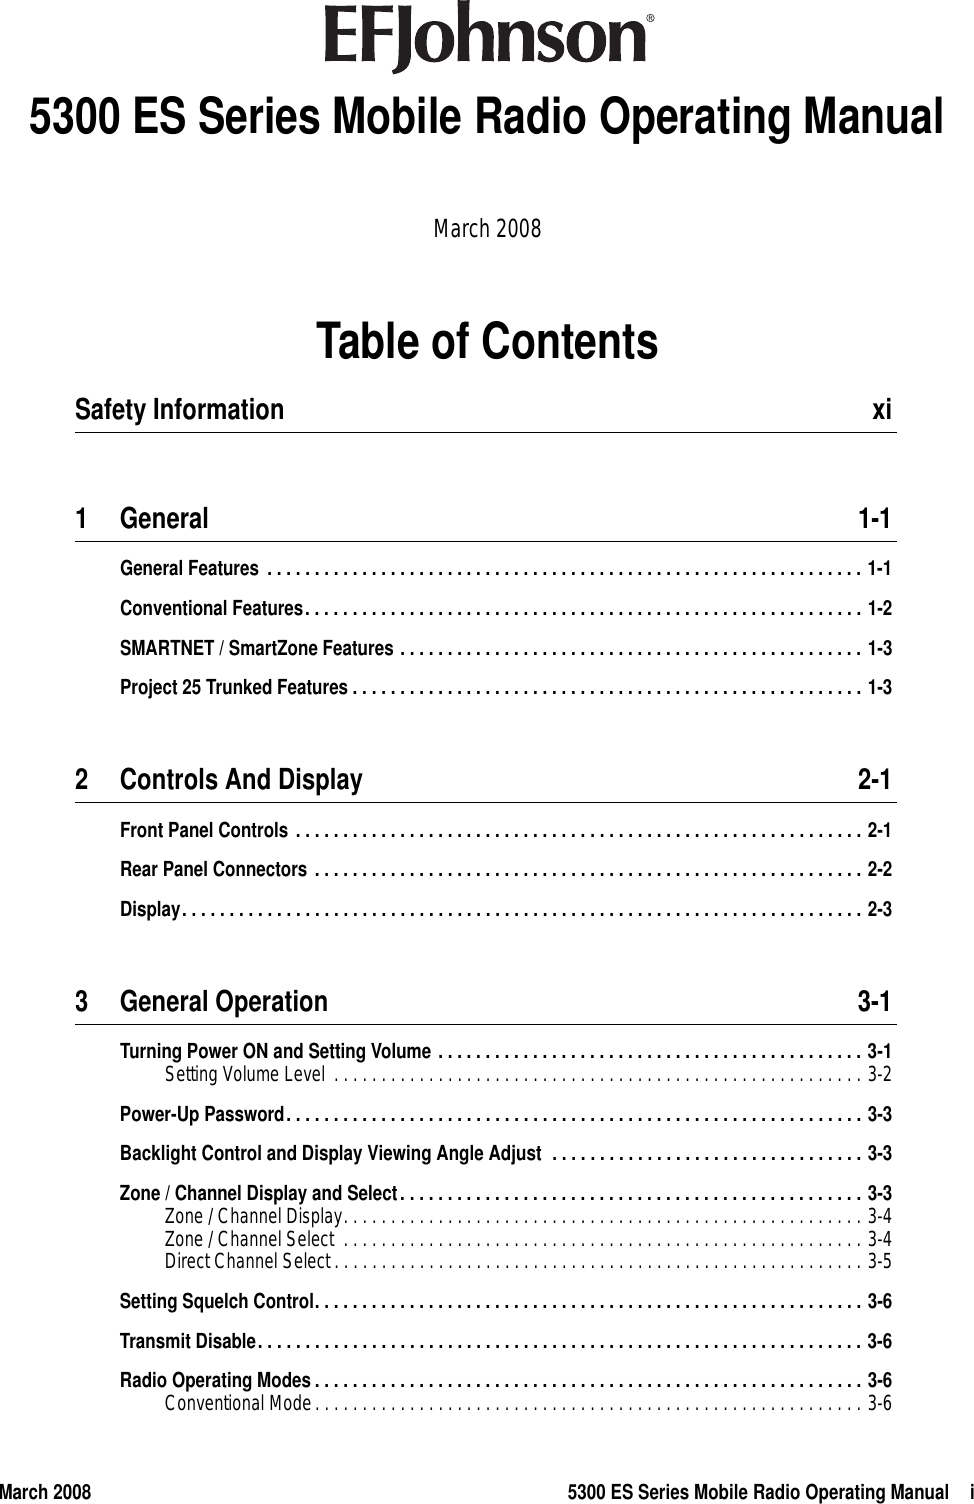 March 2008 5300 ES Series Mobile Radio Operating Manual iTable of Contents5300 ES Series Mobile Radio Operating ManualMarch 2008Safety Information  xi1 General 1-1General Features . . . . . . . . . . . . . . . . . . . . . . . . . . . . . . . . . . . . . . . . . . . . . . . . . . . . . . . . . . . . . . . 1-1Conventional Features. . . . . . . . . . . . . . . . . . . . . . . . . . . . . . . . . . . . . . . . . . . . . . . . . . . . . . . . . . . 1-2SMARTNET / SmartZone Features . . . . . . . . . . . . . . . . . . . . . . . . . . . . . . . . . . . . . . . . . . . . . . . . . 1-3Project 25 Trunked Features . . . . . . . . . . . . . . . . . . . . . . . . . . . . . . . . . . . . . . . . . . . . . . . . . . . . . . 1-32 Controls And Display 2-1Front Panel Controls . . . . . . . . . . . . . . . . . . . . . . . . . . . . . . . . . . . . . . . . . . . . . . . . . . . . . . . . . . . . 2-1Rear Panel Connectors . . . . . . . . . . . . . . . . . . . . . . . . . . . . . . . . . . . . . . . . . . . . . . . . . . . . . . . . . . 2-2Display. . . . . . . . . . . . . . . . . . . . . . . . . . . . . . . . . . . . . . . . . . . . . . . . . . . . . . . . . . . . . . . . . . . . . . . . 2-33 General Operation 3-1Turning Power ON and Setting Volume . . . . . . . . . . . . . . . . . . . . . . . . . . . . . . . . . . . . . . . . . . . . . 3-1Setting Volume Level  . . . . . . . . . . . . . . . . . . . . . . . . . . . . . . . . . . . . . . . . . . . . . . . . . . . . . . . . 3-2Power-Up Password. . . . . . . . . . . . . . . . . . . . . . . . . . . . . . . . . . . . . . . . . . . . . . . . . . . . . . . . . . . . . 3-3Backlight Control and Display Viewing Angle Adjust  . . . . . . . . . . . . . . . . . . . . . . . . . . . . . . . . . 3-3Zone / Channel Display and Select. . . . . . . . . . . . . . . . . . . . . . . . . . . . . . . . . . . . . . . . . . . . . . . . . 3-3Zone / Channel Display. . . . . . . . . . . . . . . . . . . . . . . . . . . . . . . . . . . . . . . . . . . . . . . . . . . . . . . 3-4Zone / Channel Select  . . . . . . . . . . . . . . . . . . . . . . . . . . . . . . . . . . . . . . . . . . . . . . . . . . . . . . . 3-4Direct Channel Select . . . . . . . . . . . . . . . . . . . . . . . . . . . . . . . . . . . . . . . . . . . . . . . . . . . . . . . . 3-5Setting Squelch Control. . . . . . . . . . . . . . . . . . . . . . . . . . . . . . . . . . . . . . . . . . . . . . . . . . . . . . . . . . 3-6Transmit Disable. . . . . . . . . . . . . . . . . . . . . . . . . . . . . . . . . . . . . . . . . . . . . . . . . . . . . . . . . . . . . . . . 3-6Radio Operating Modes. . . . . . . . . . . . . . . . . . . . . . . . . . . . . . . . . . . . . . . . . . . . . . . . . . . . . . . . . . 3-6Conventional Mode. . . . . . . . . . . . . . . . . . . . . . . . . . . . . . . . . . . . . . . . . . . . . . . . . . . . . . . . . . 3-6